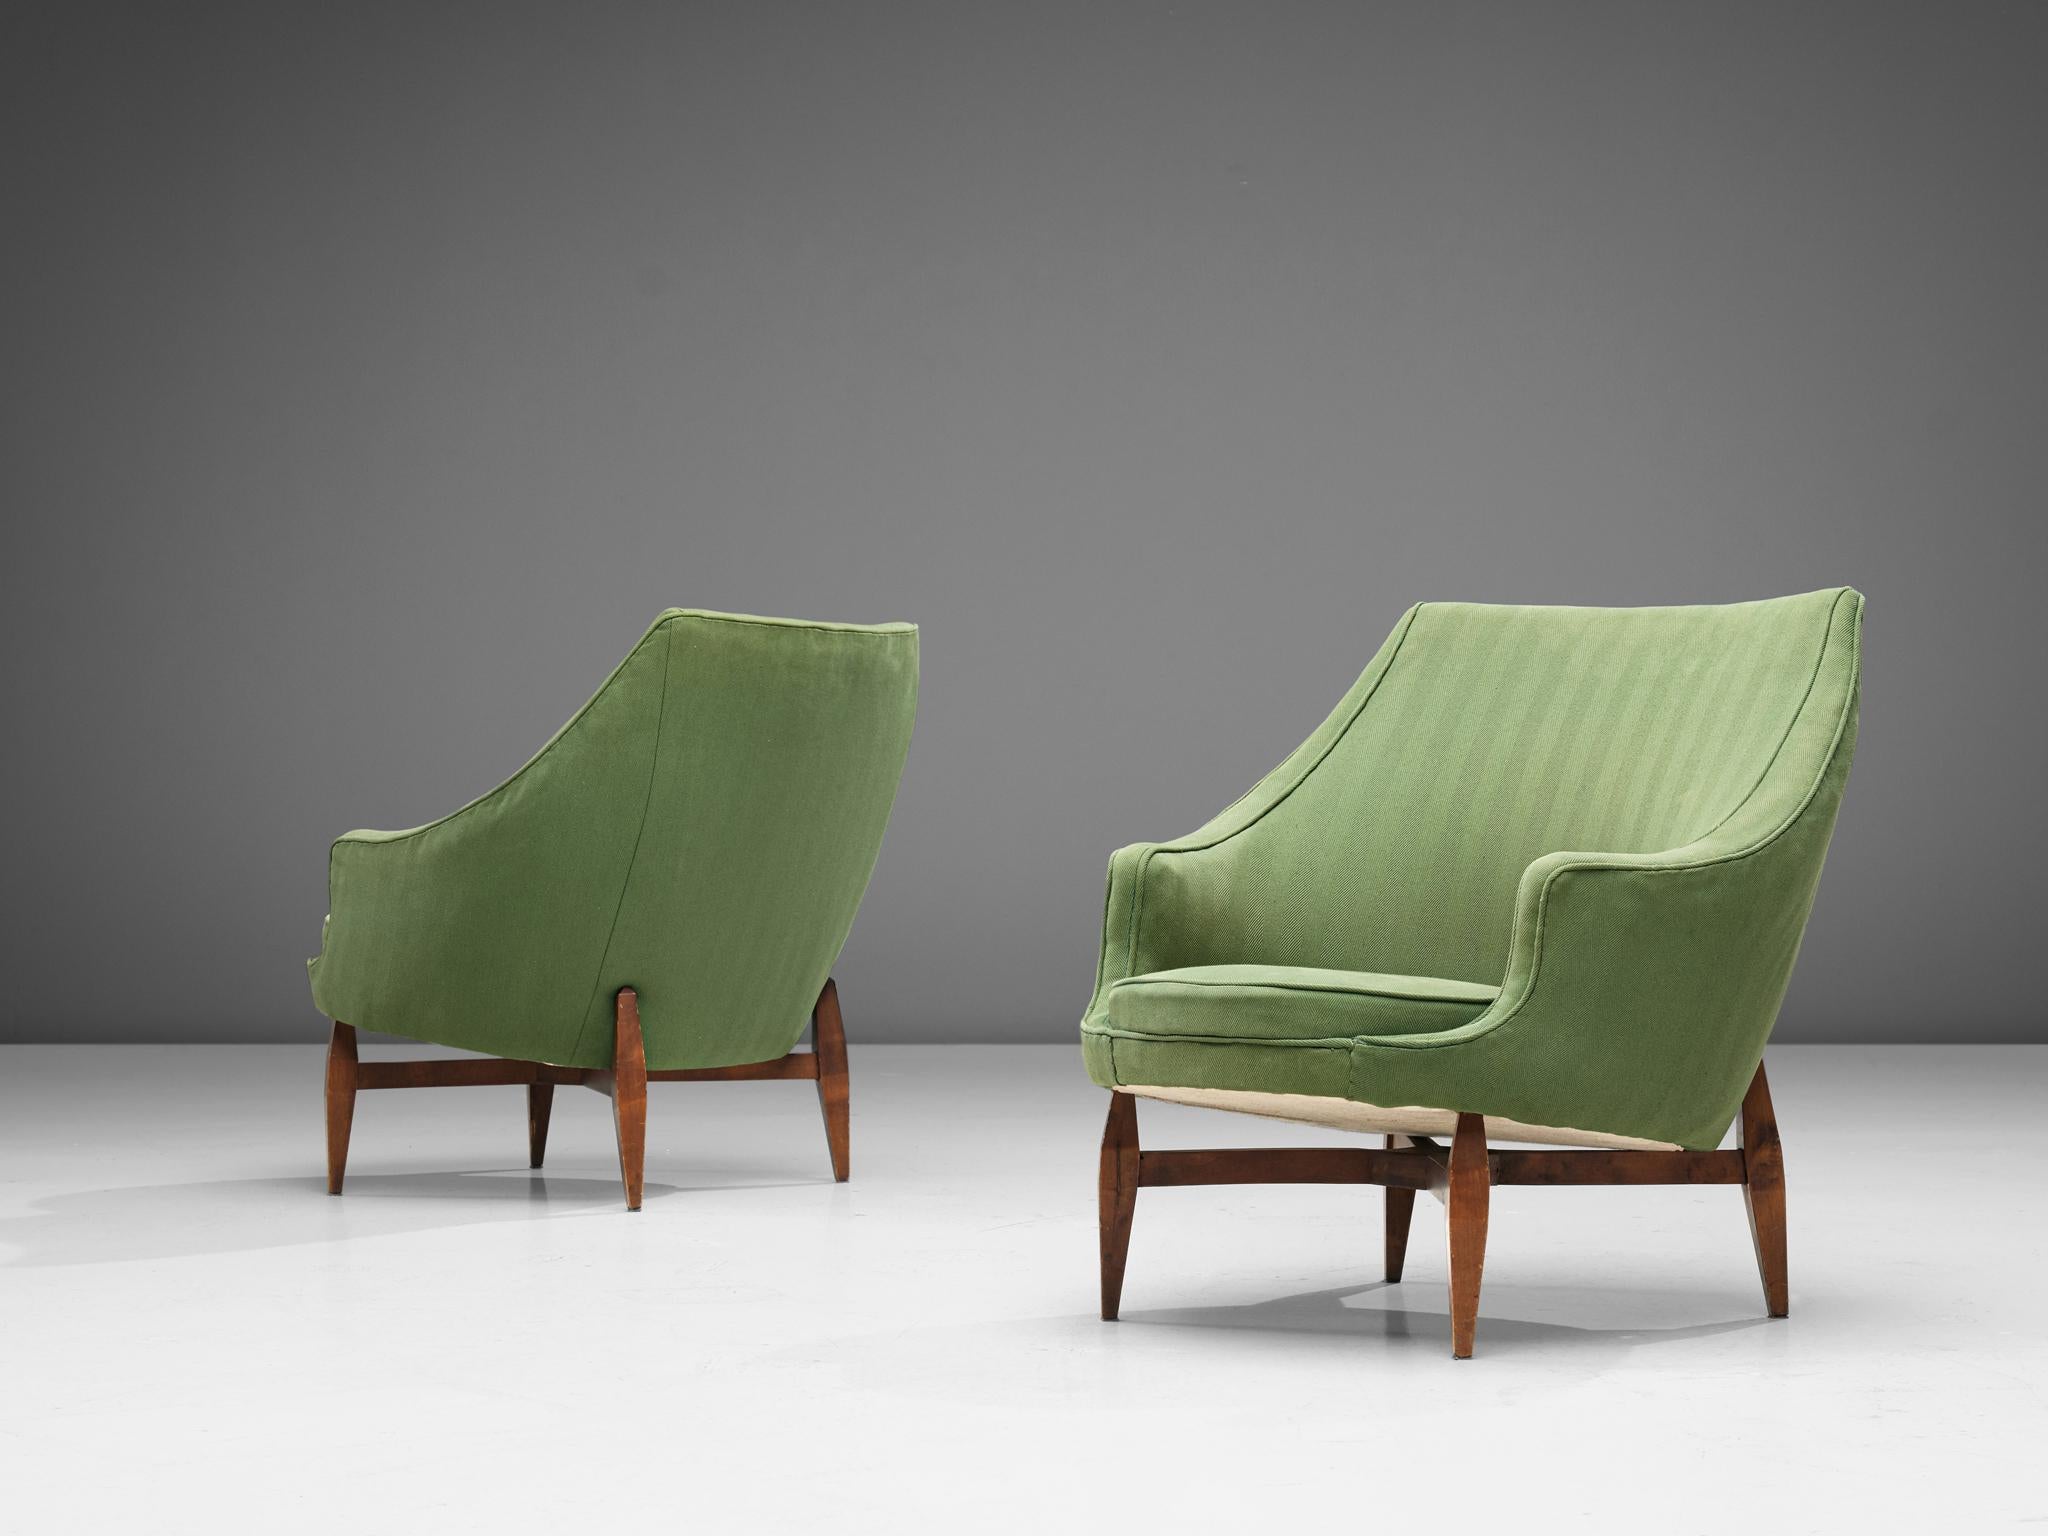 Pair of lounge chairs, fabric and beech, Italy, 1950s

A sensuous pair of armchairs that features a sculptural back with short armrests and a round seat. The tapered wooden legs give the chairs a more airy touch and support the floating seating in